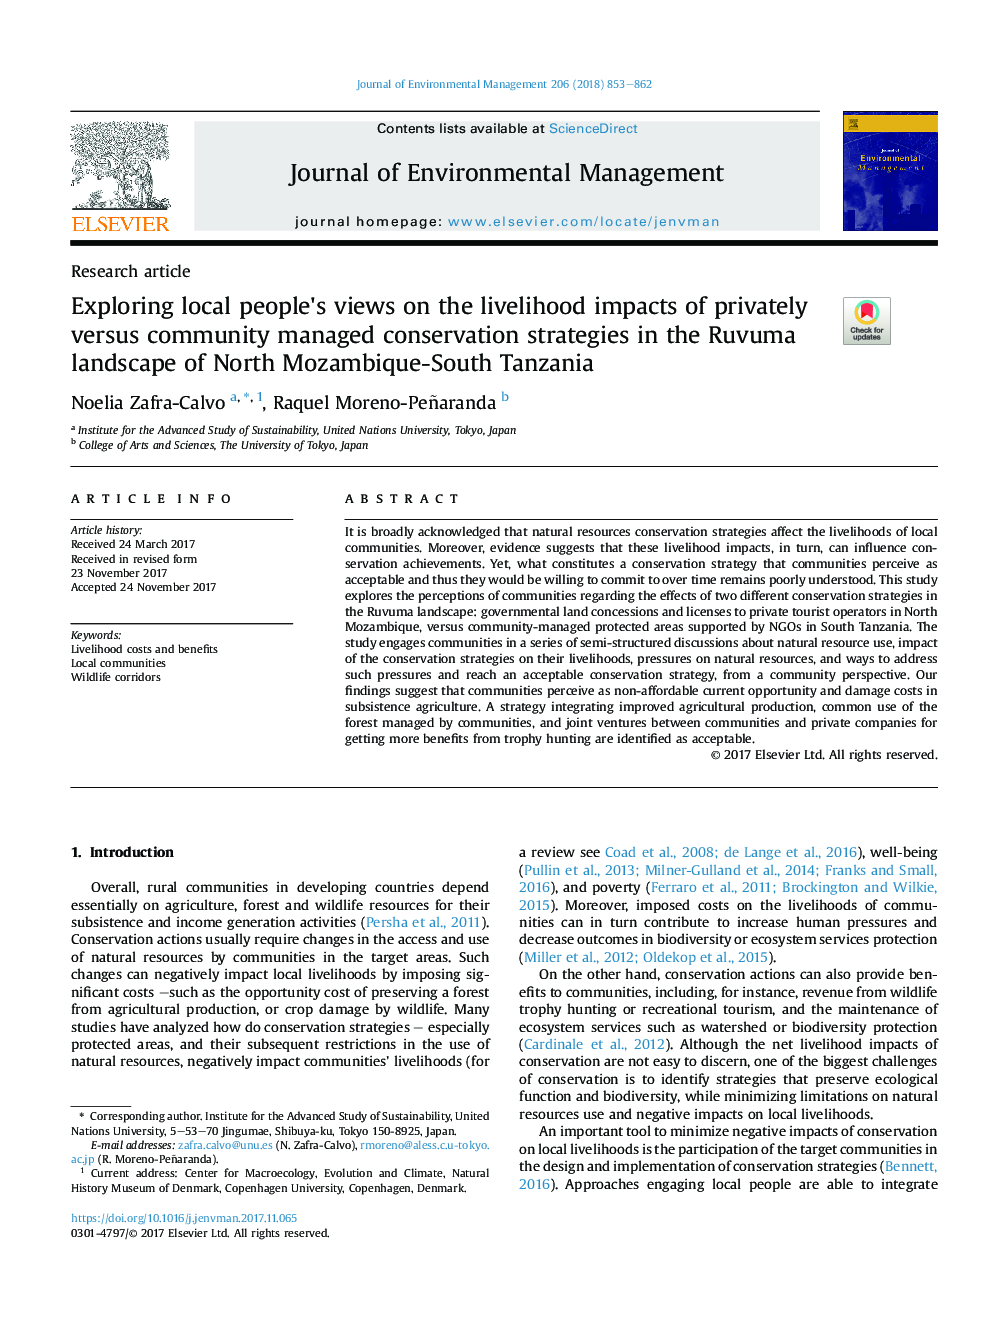 Exploring local people's views on the livelihood impacts of privately versus community managed conservation strategies in the Ruvuma landscape of North Mozambique-South Tanzania